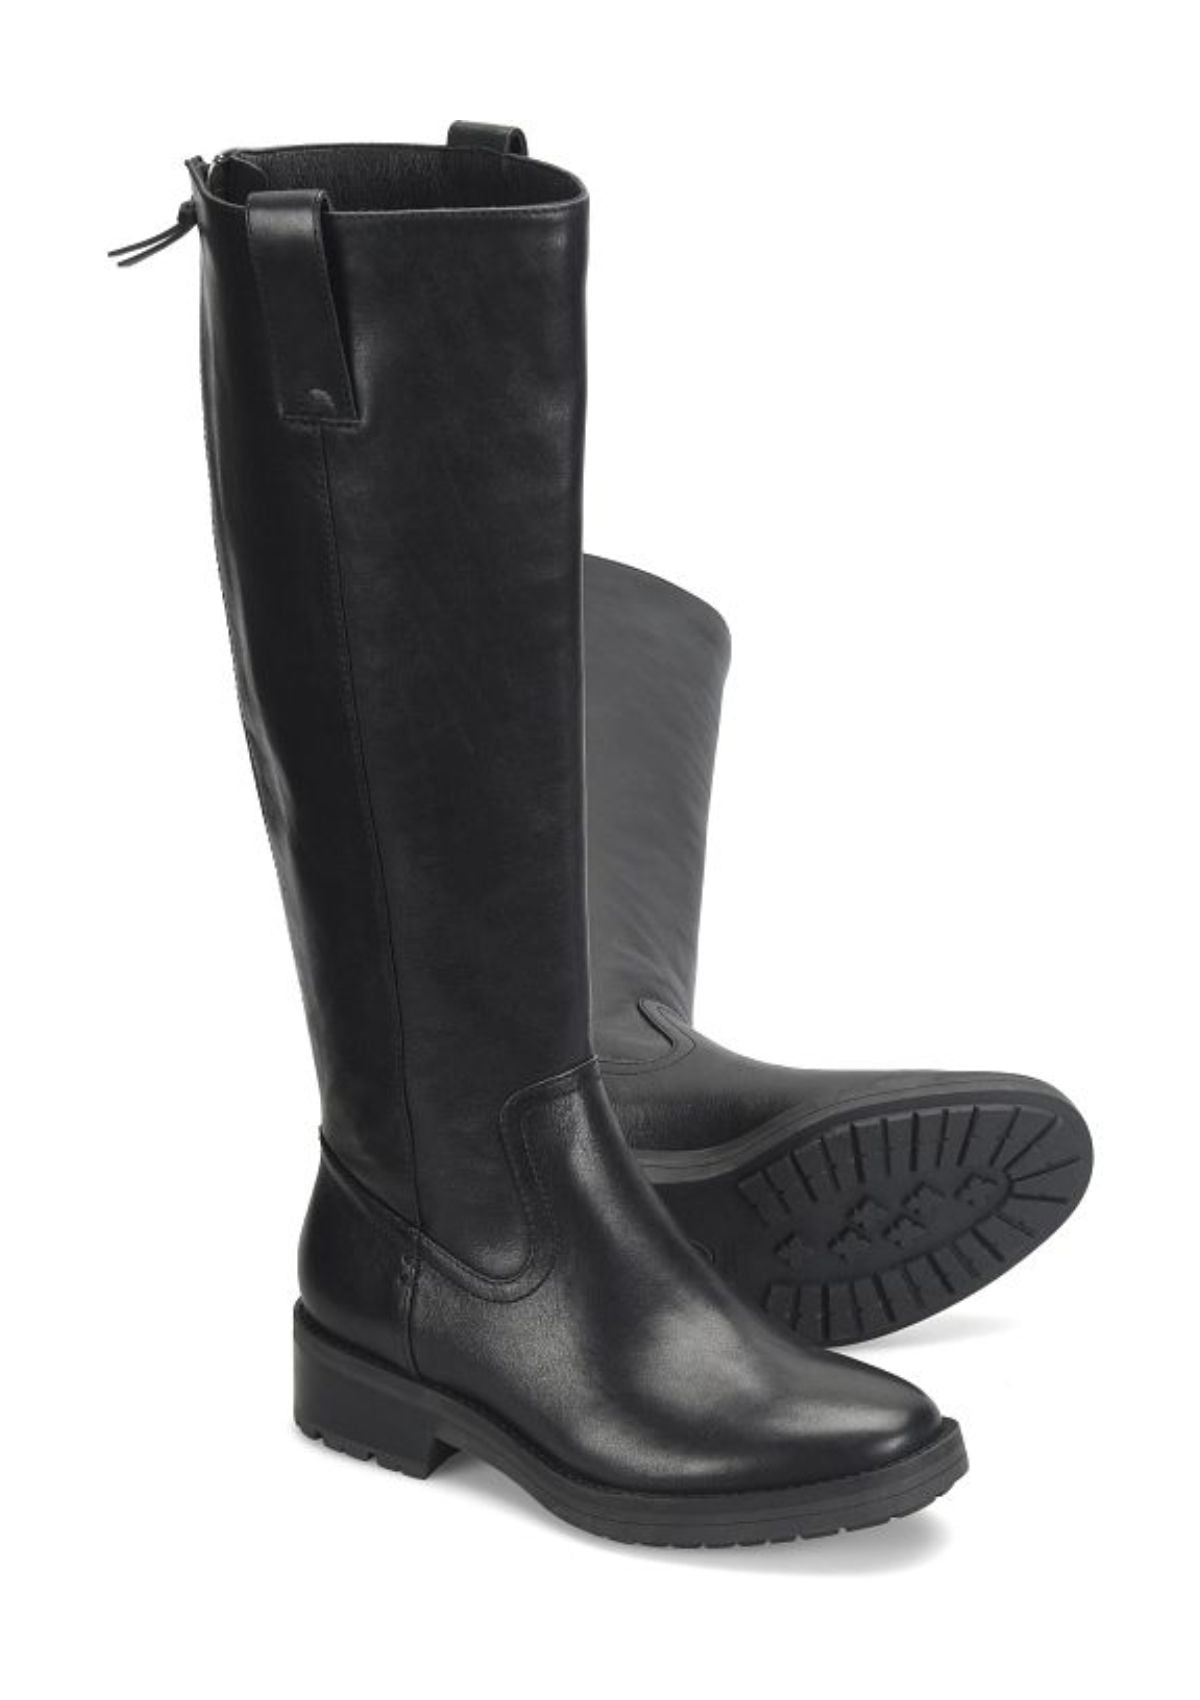 Samantha II Black Leather Upper, Tall Boot with Back Zipper -Sofft Shoe Co- Ruby Jane-